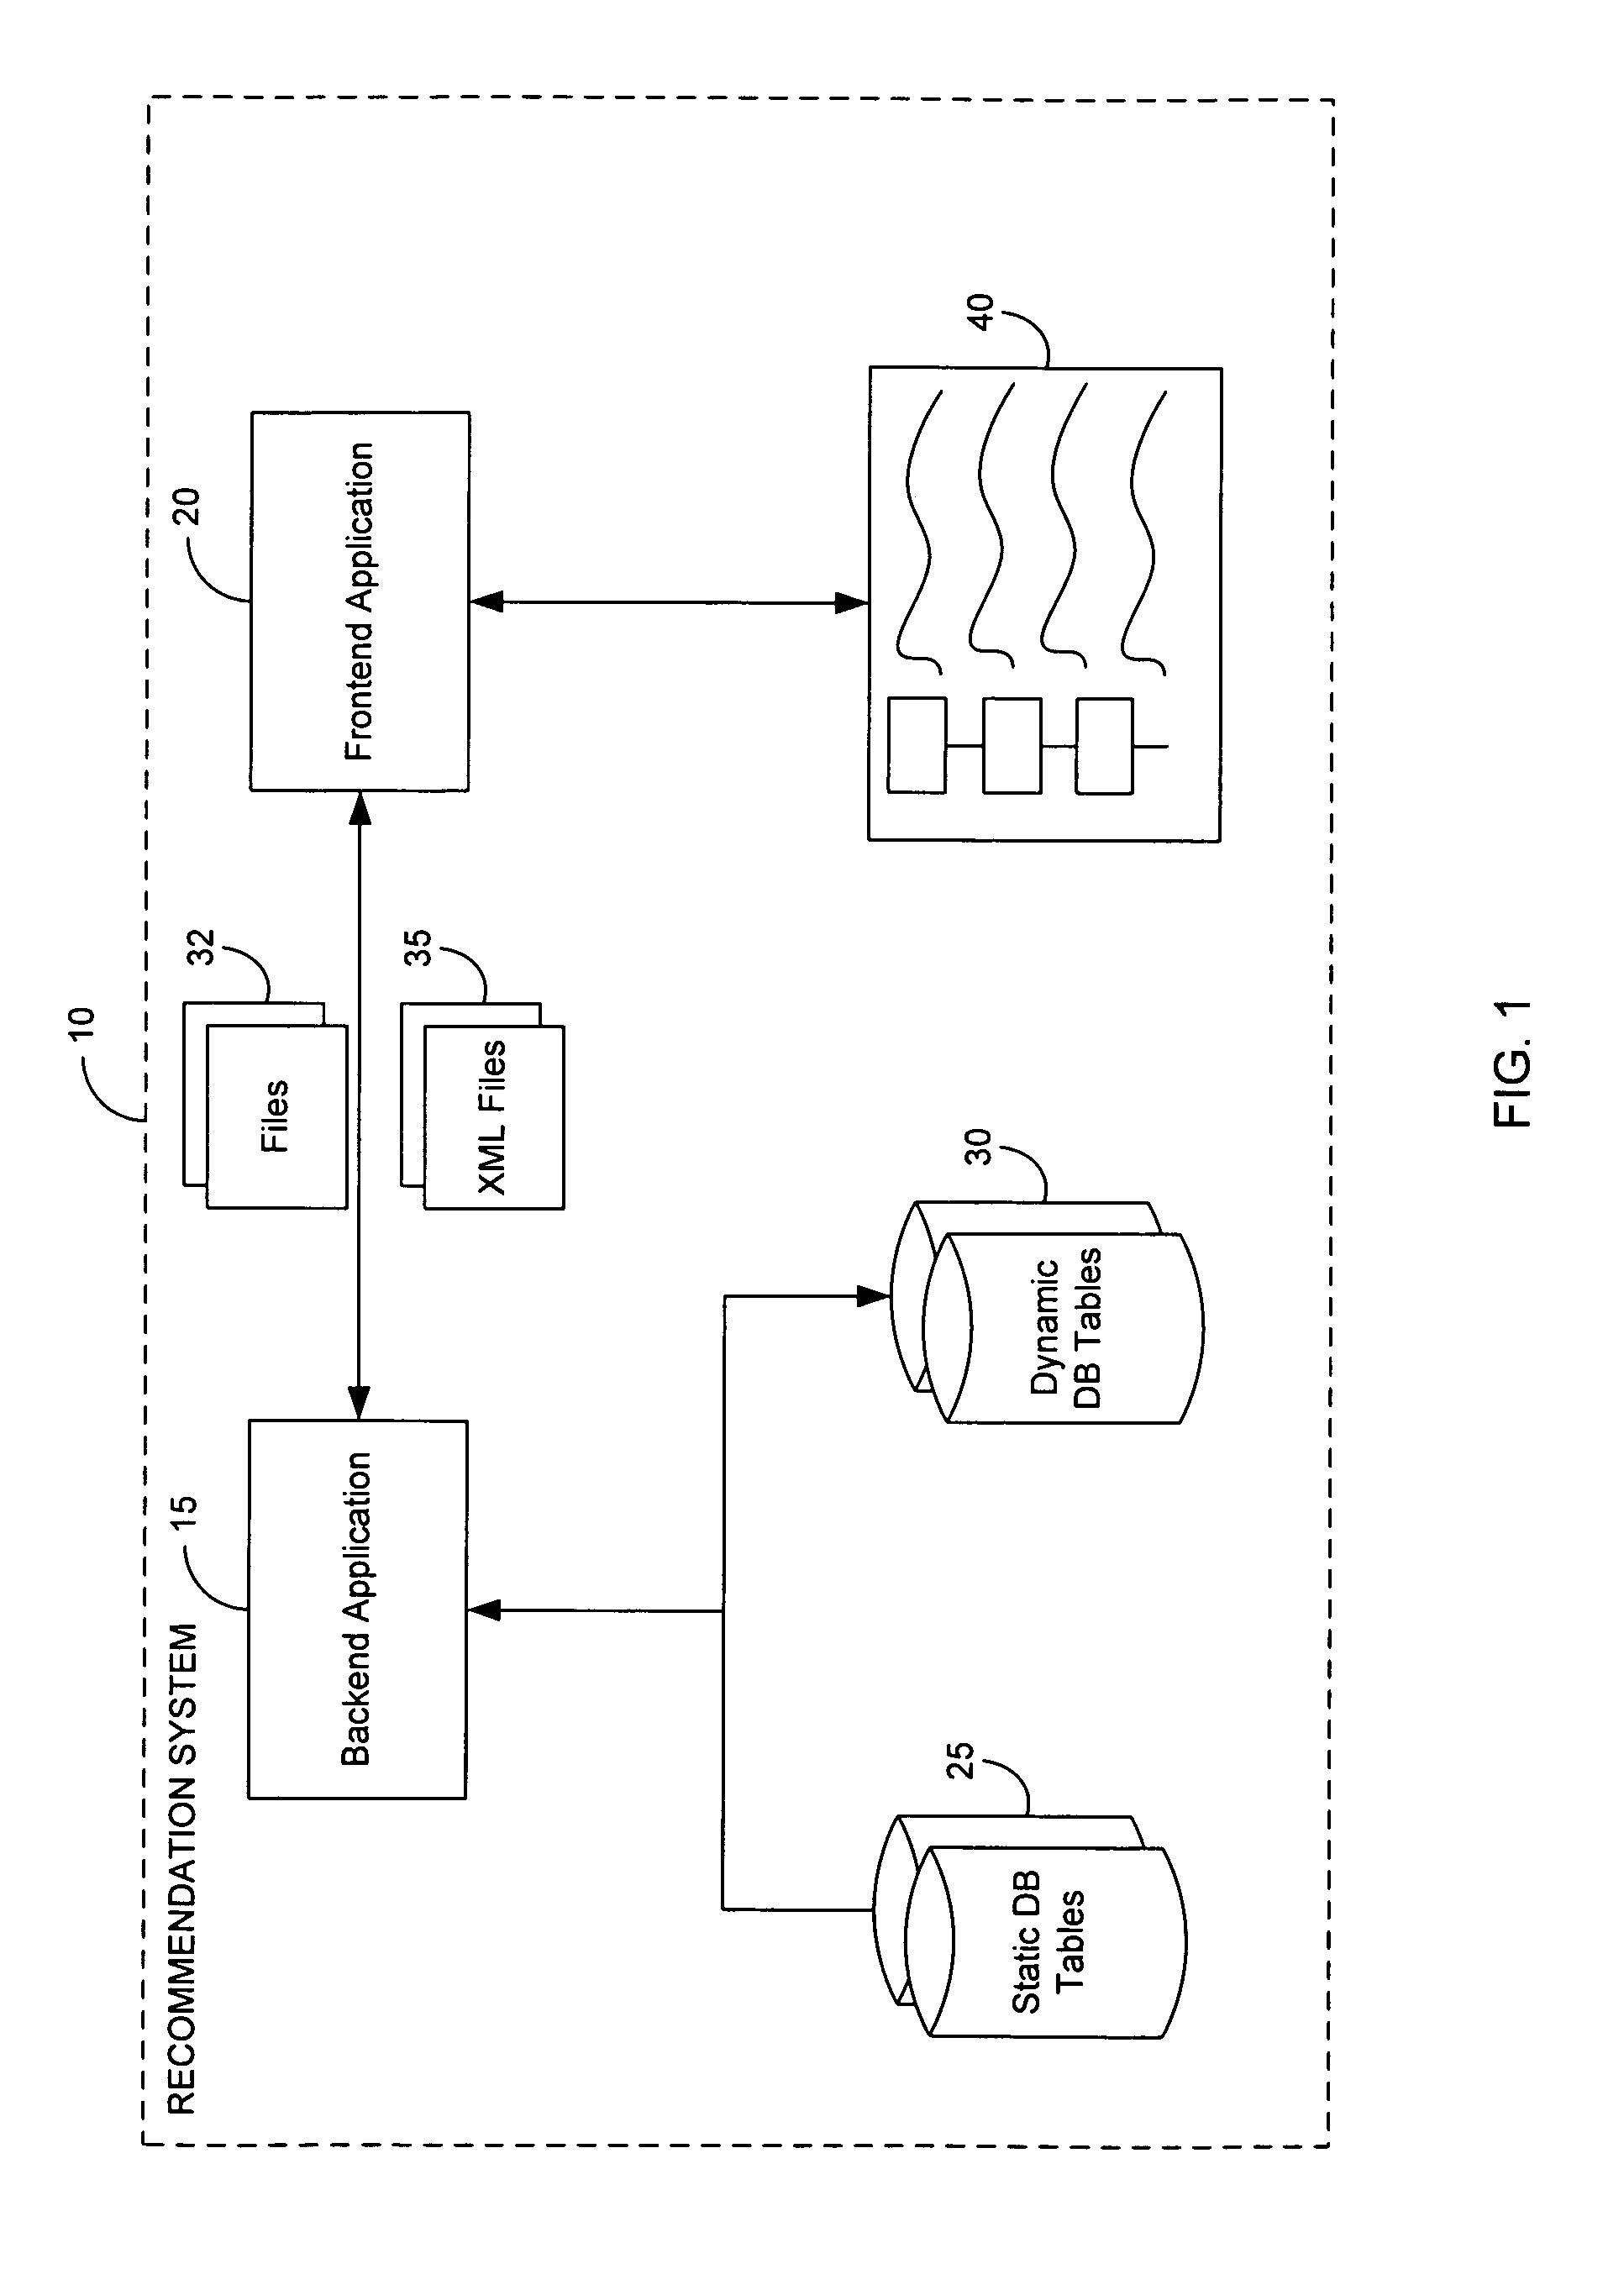 Extensible configuration engine system and method